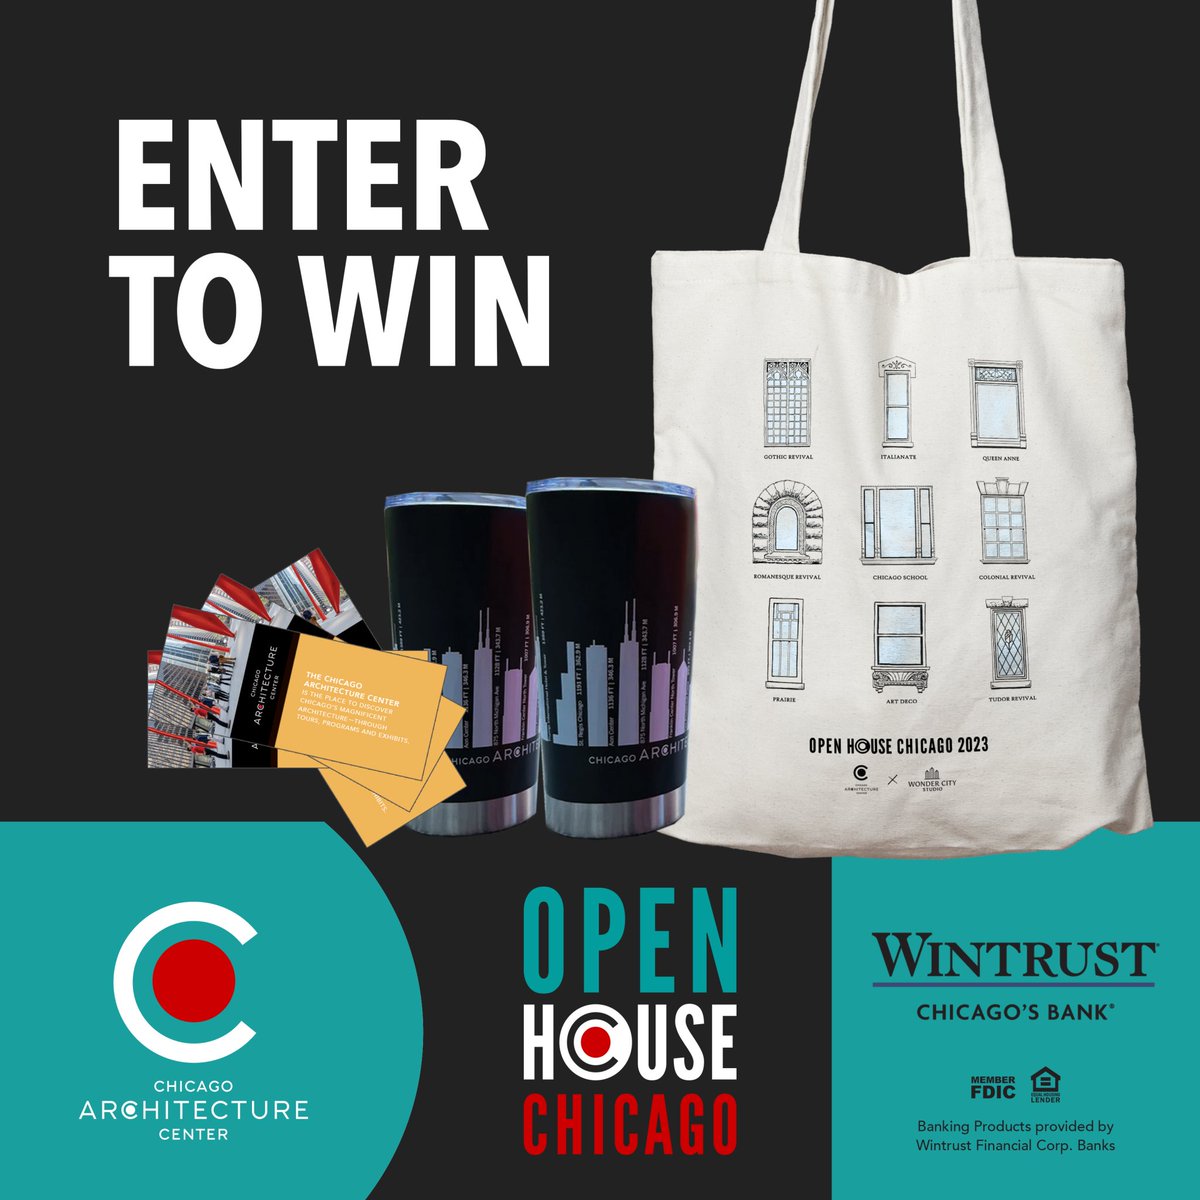 Win a VIP Experience for Open House Chicago Oct 14-15! From @chiarchitecture + @wintrust. Tag a friend to be entered to win: 🏆 CAC membership 🏆 CAC walking tour passes 🏆 Fabulous merch ⭐  TOTAL VALUE: $330 ⭐ 1 winner randomly selected. Contest Rules: openhousechicago.org/2023contest